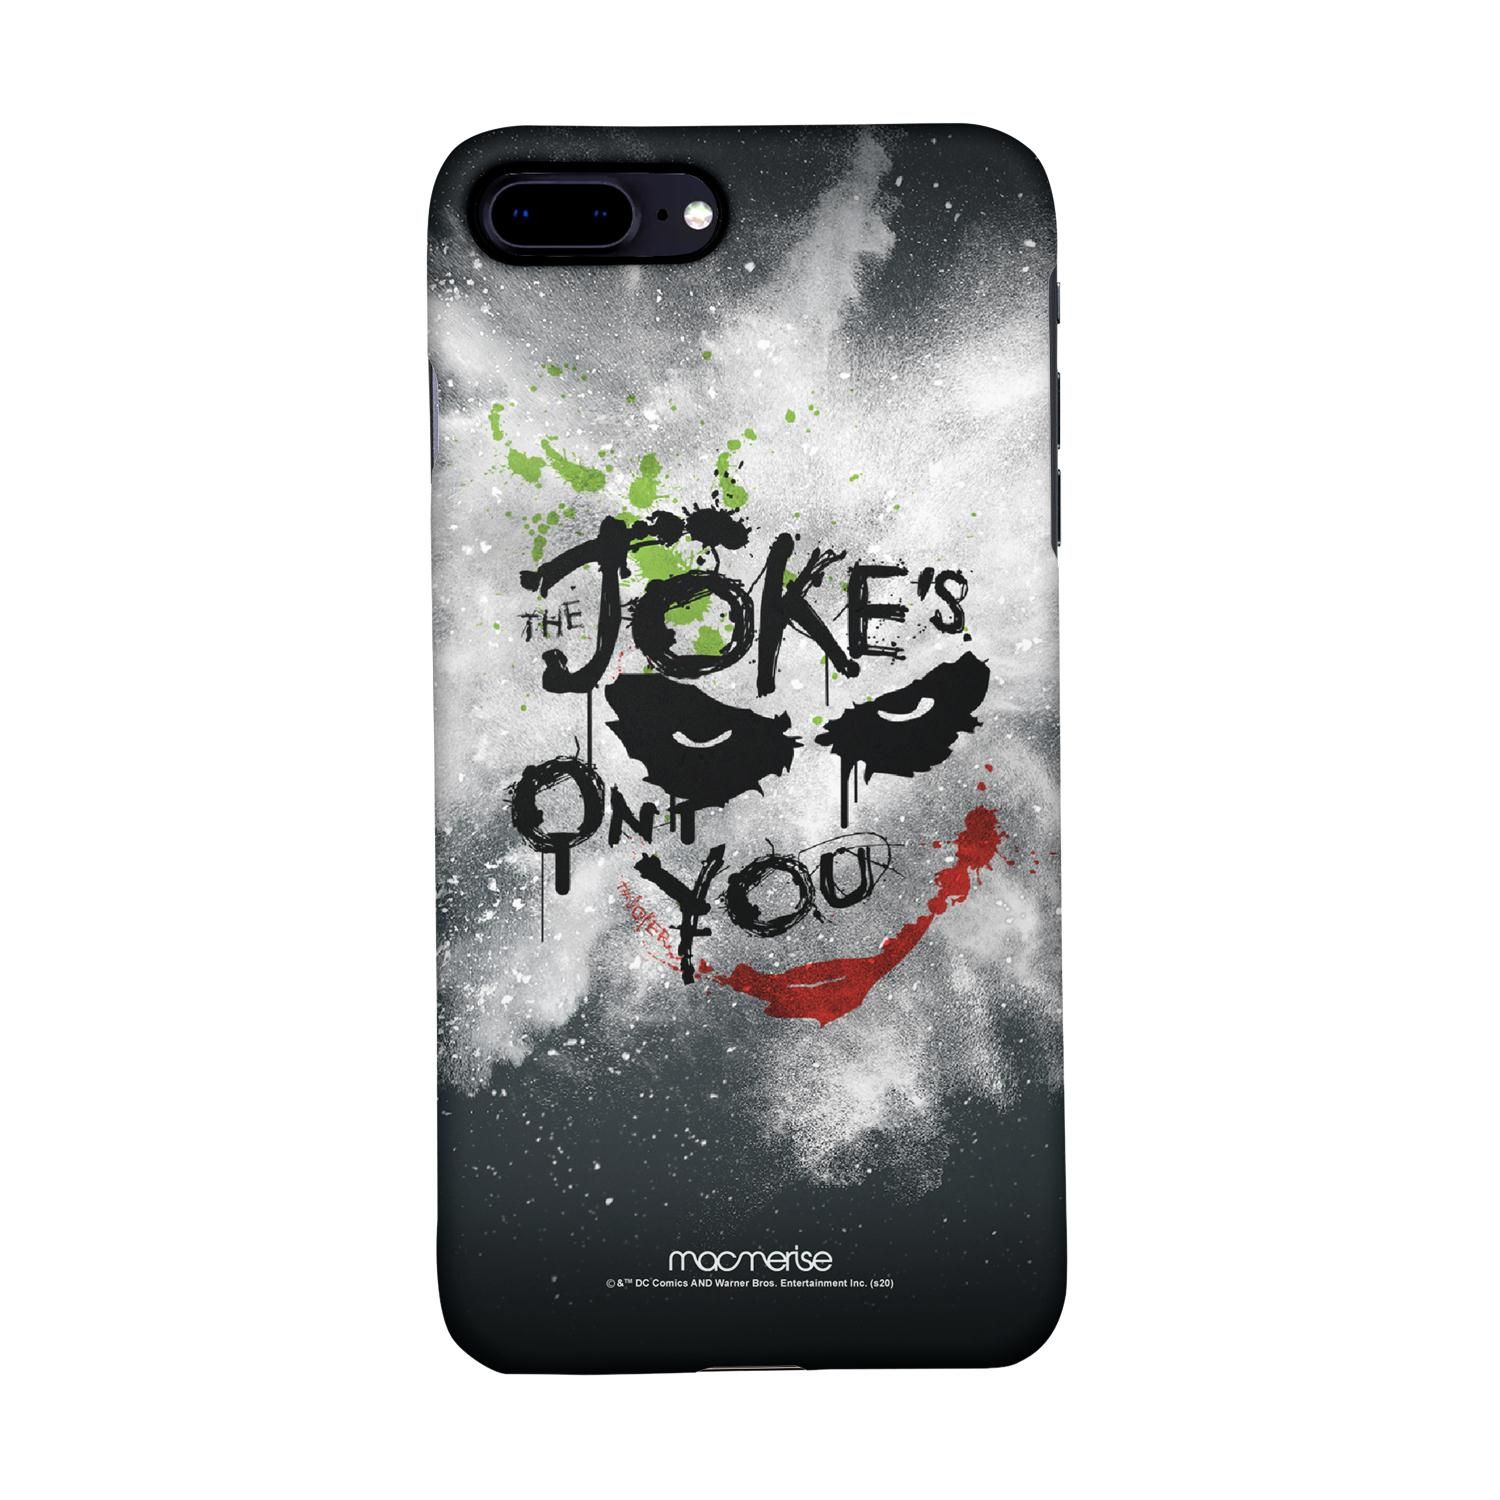 Buy The Jokes on you - Sleek Phone Case for iPhone 8 Plus Online